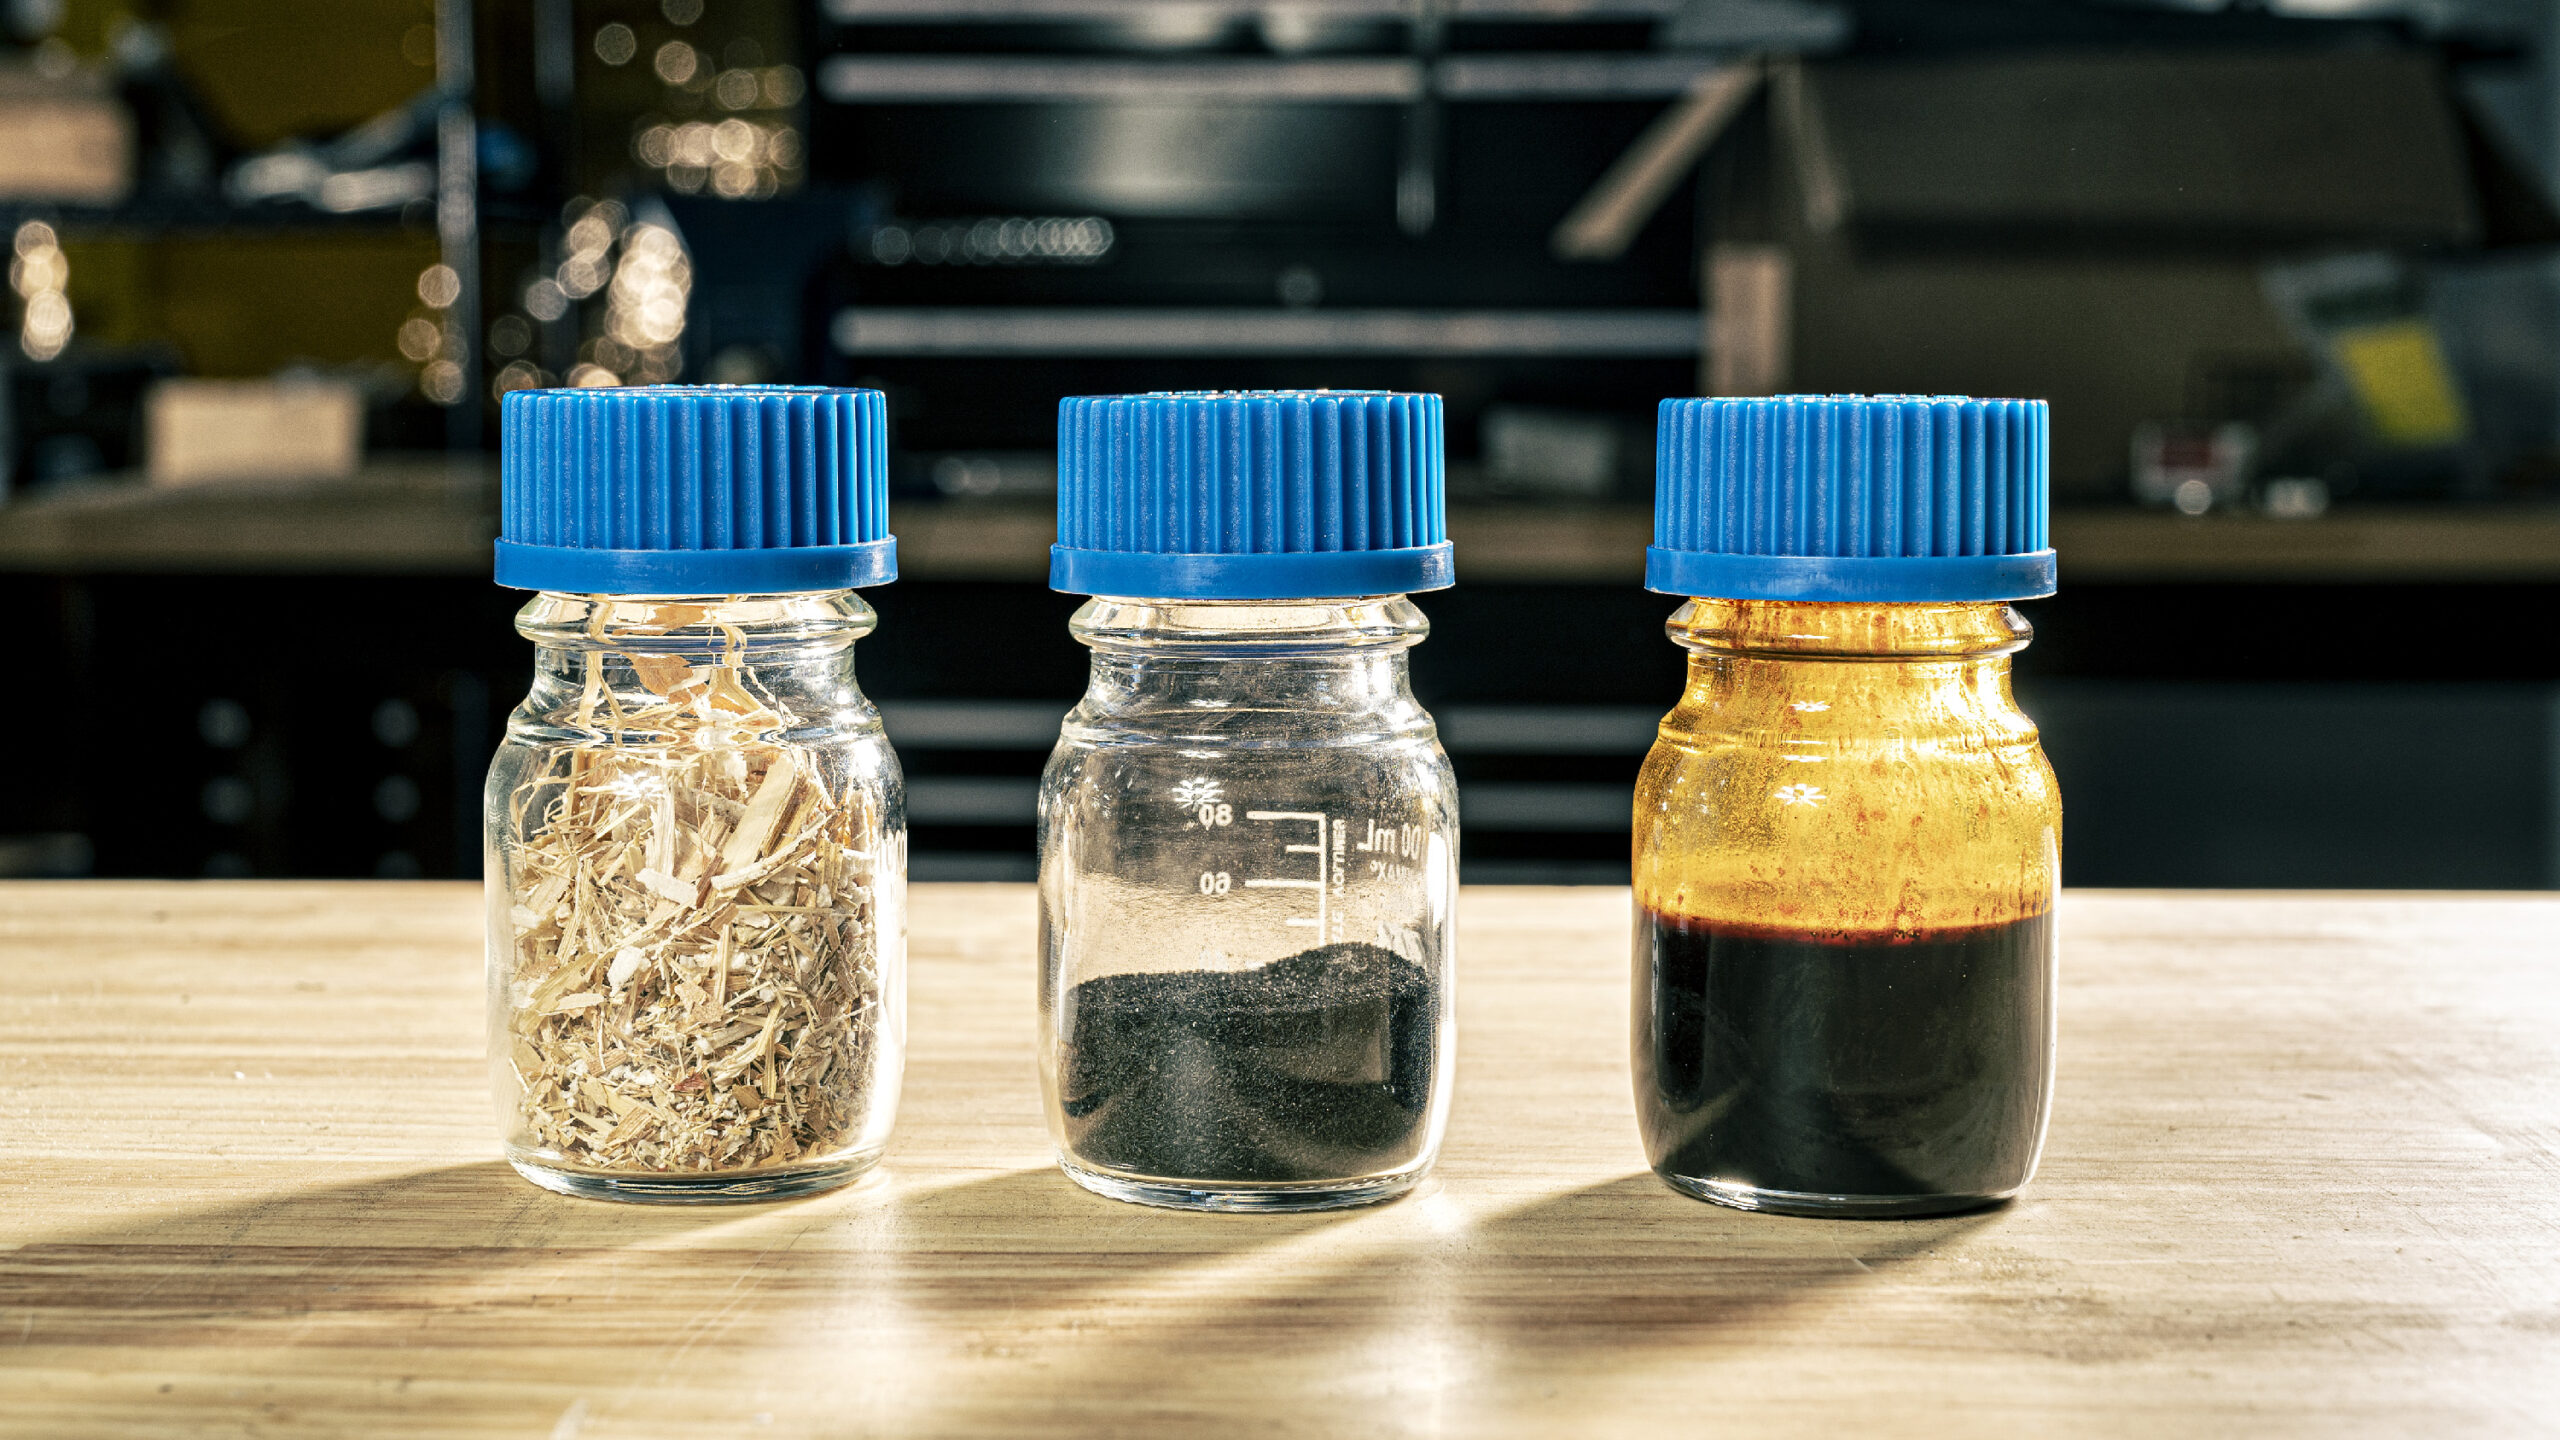 stages in the process to convert biomass to bio oil